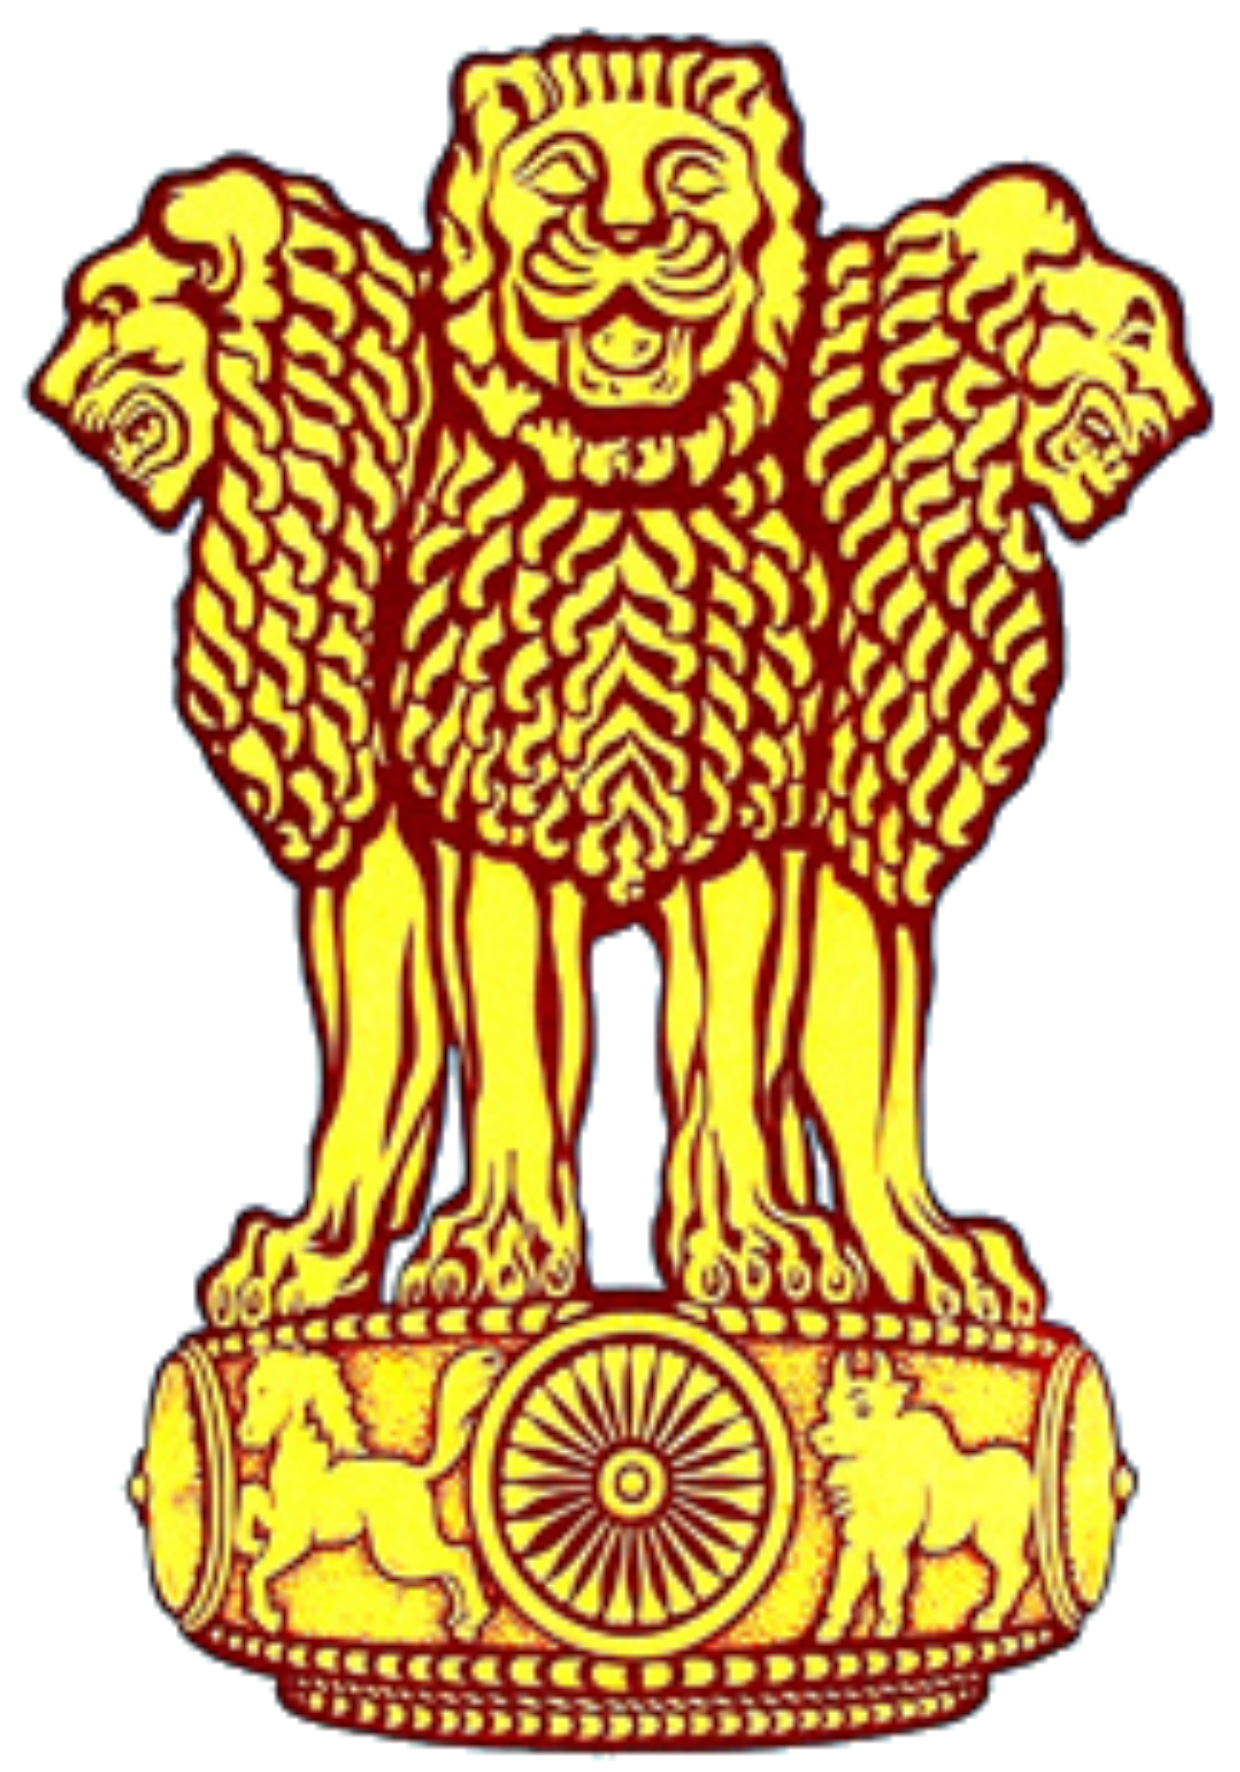 Coat of arms of India PNG image free download